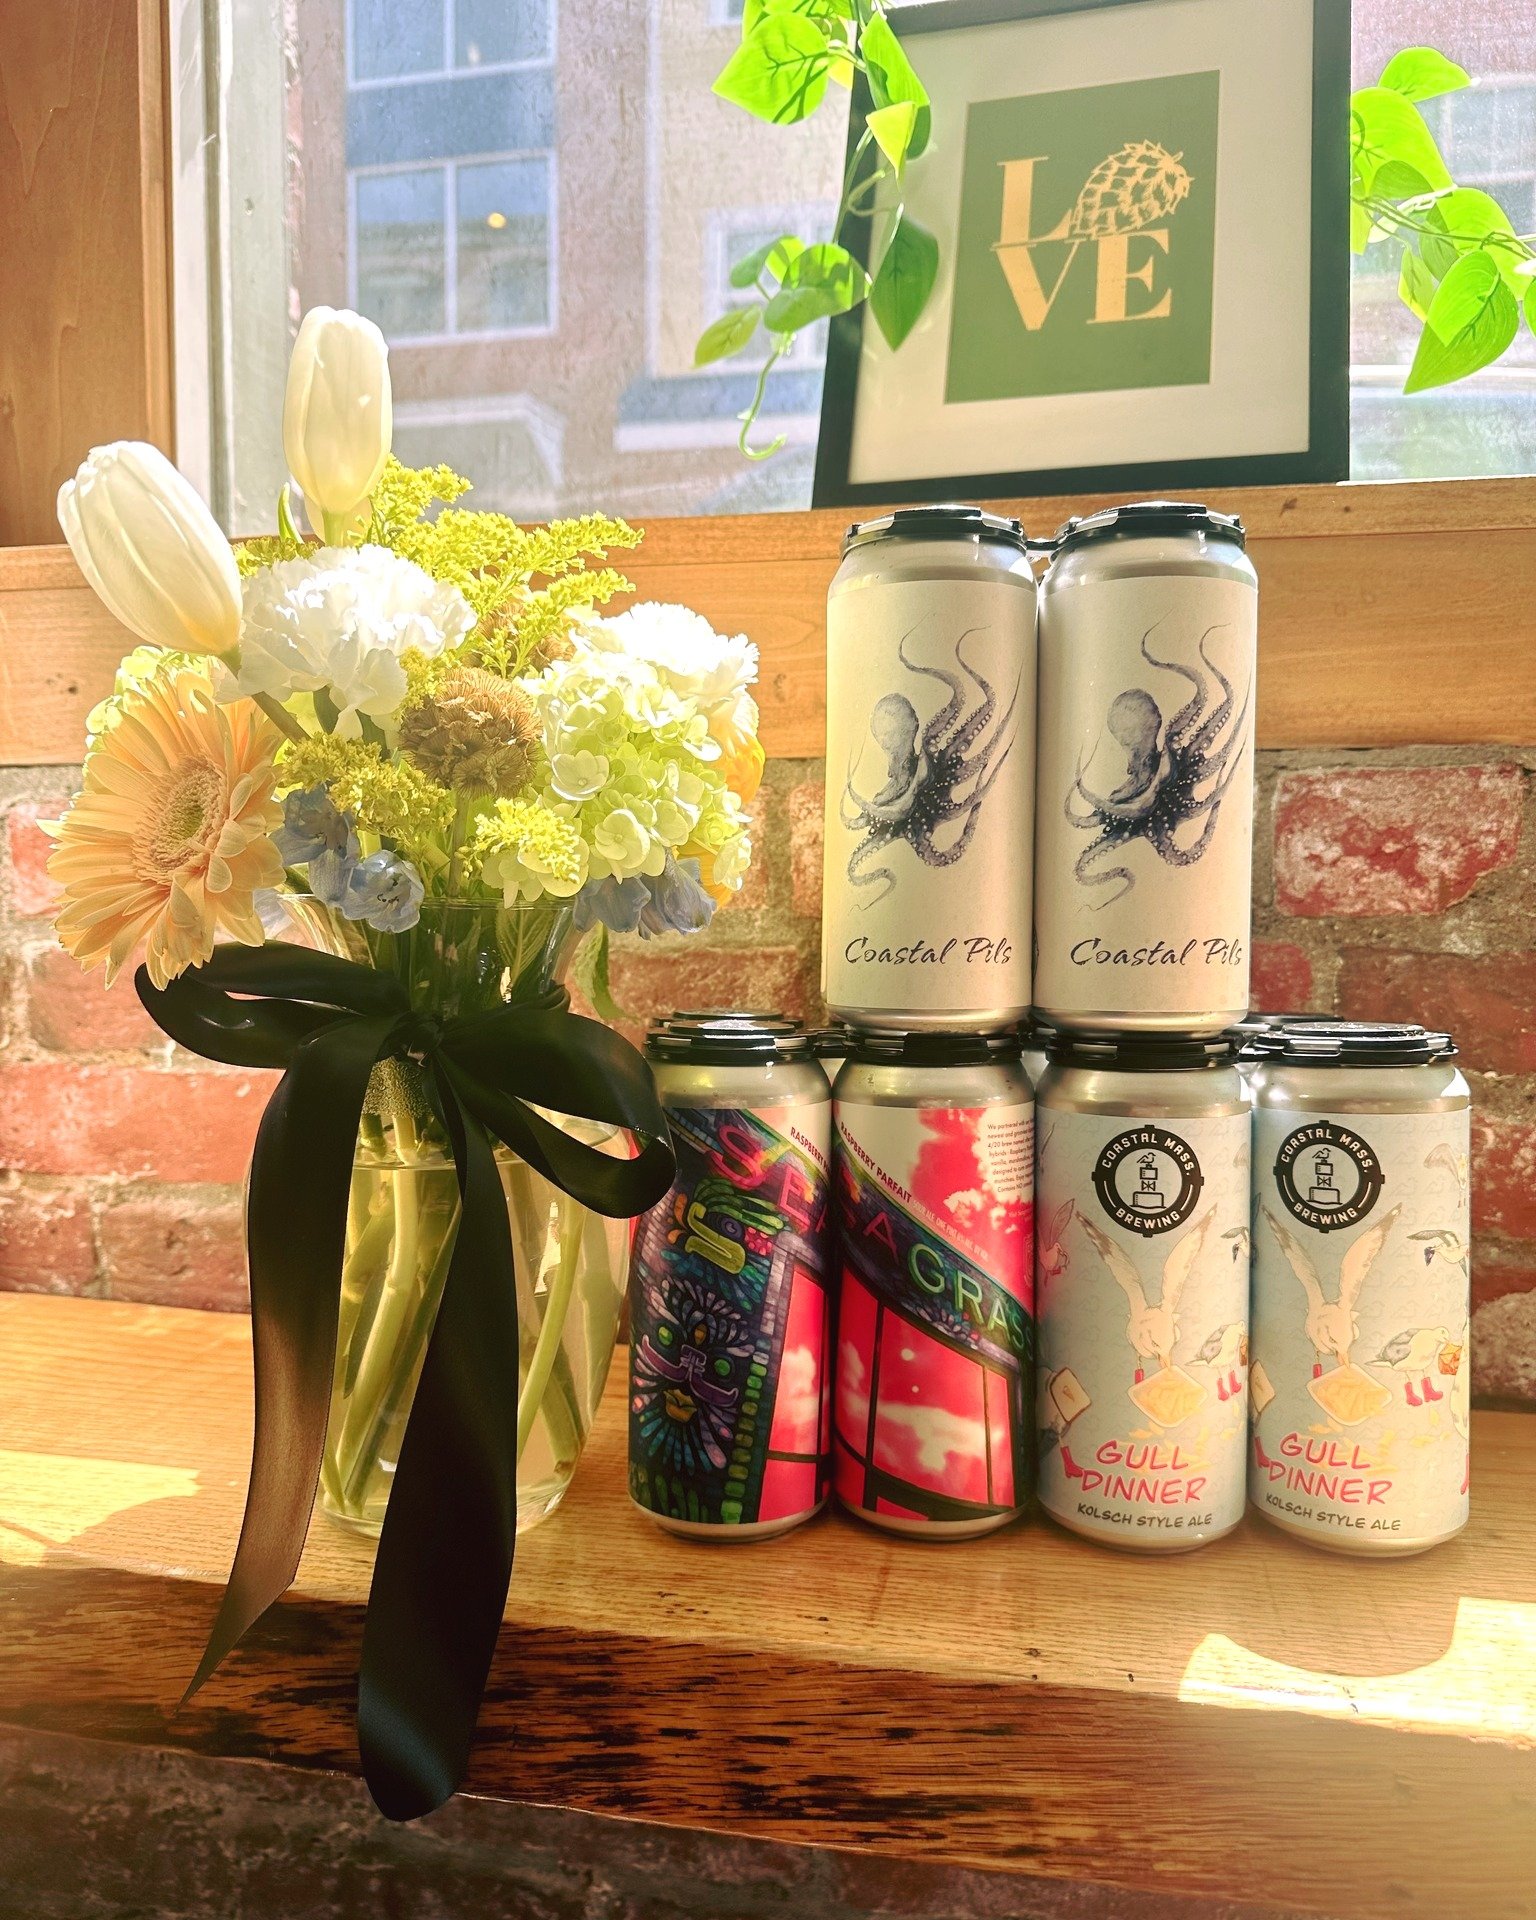 Don't just get mom flowers, MOMS LIKE BEER TOO. Stop by the Taproom from 12-6pm and grab some cans to go for a last minute gift. Better yet! Bring Mom down after brunch and let her enjoy her day. Happy Mother's Day to all the Coastal Moms out there, 